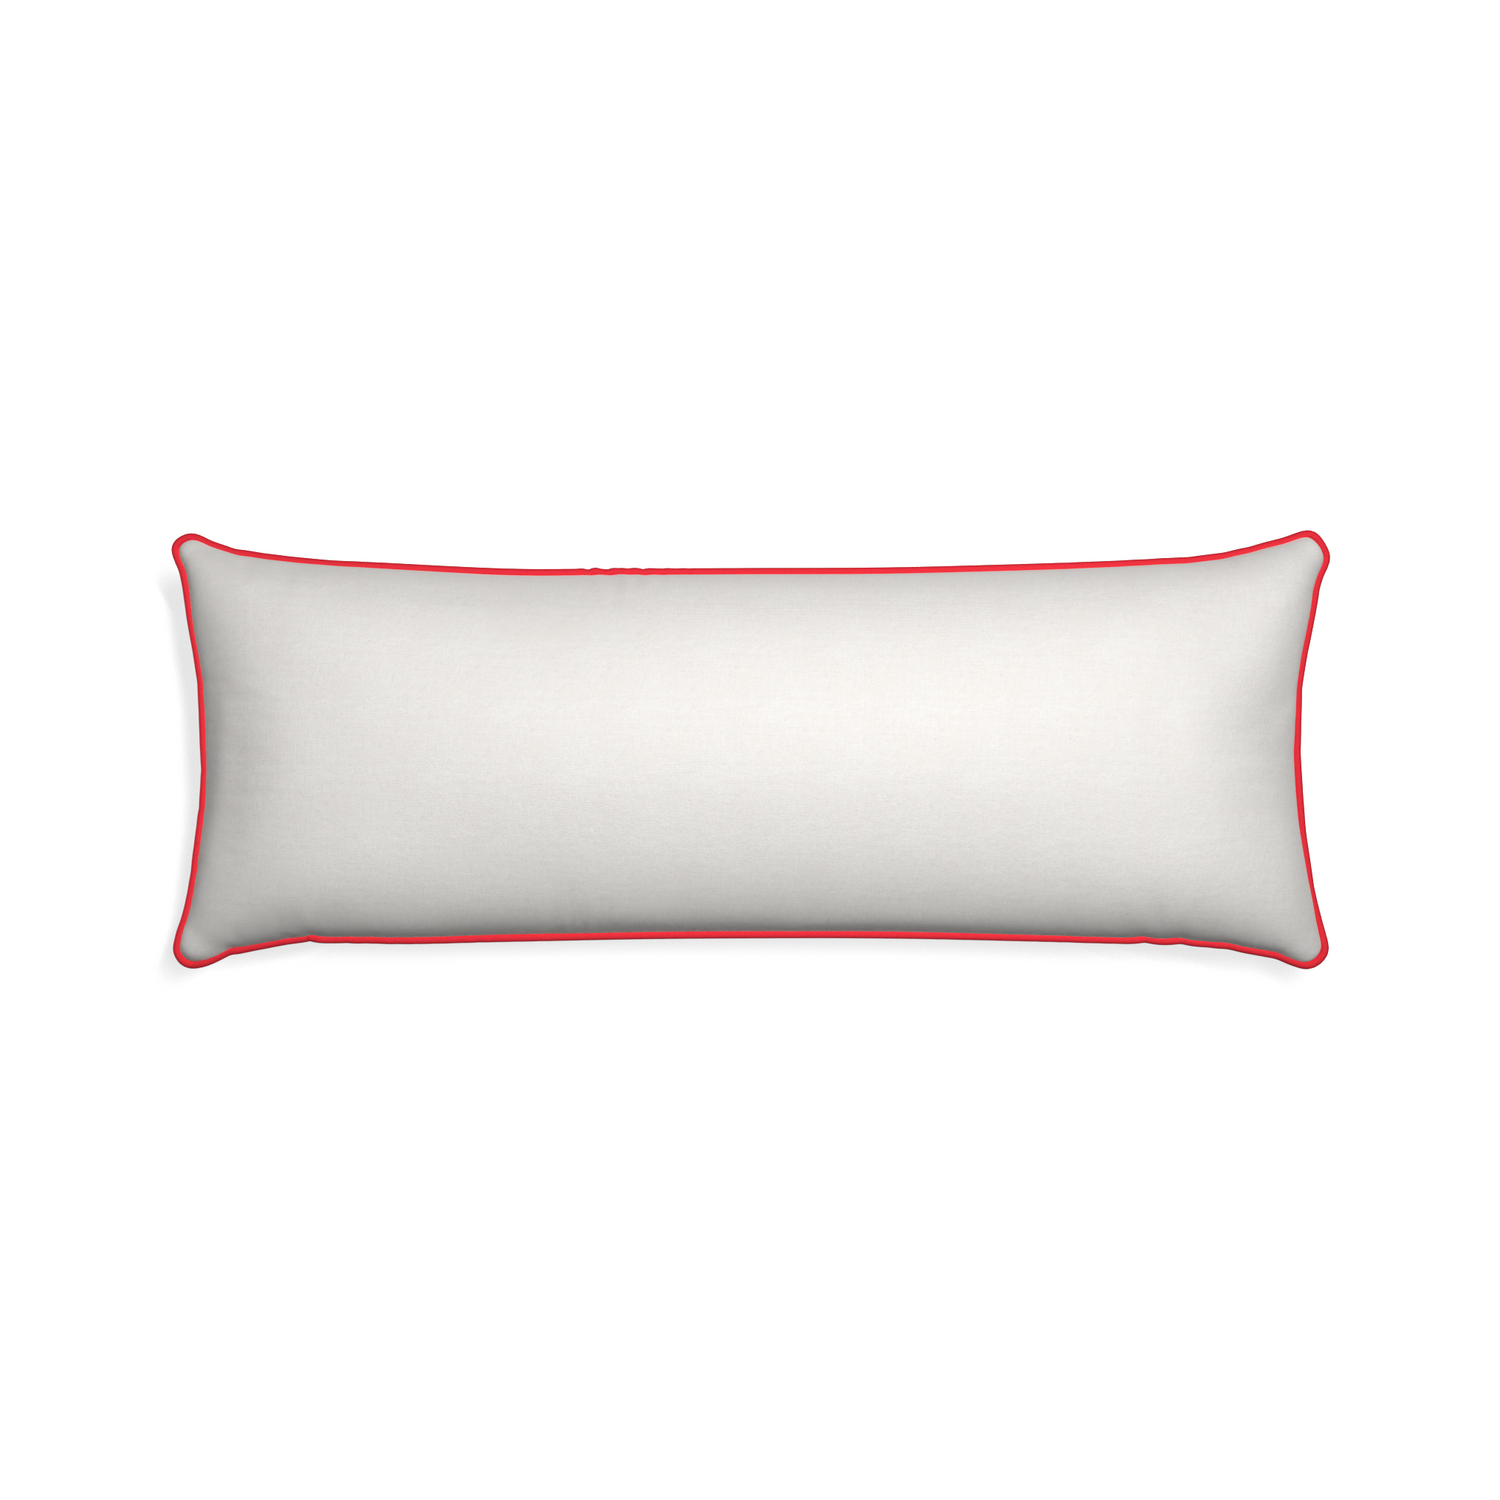 Xl-lumbar flour custom natural whitepillow with cherry piping on white background